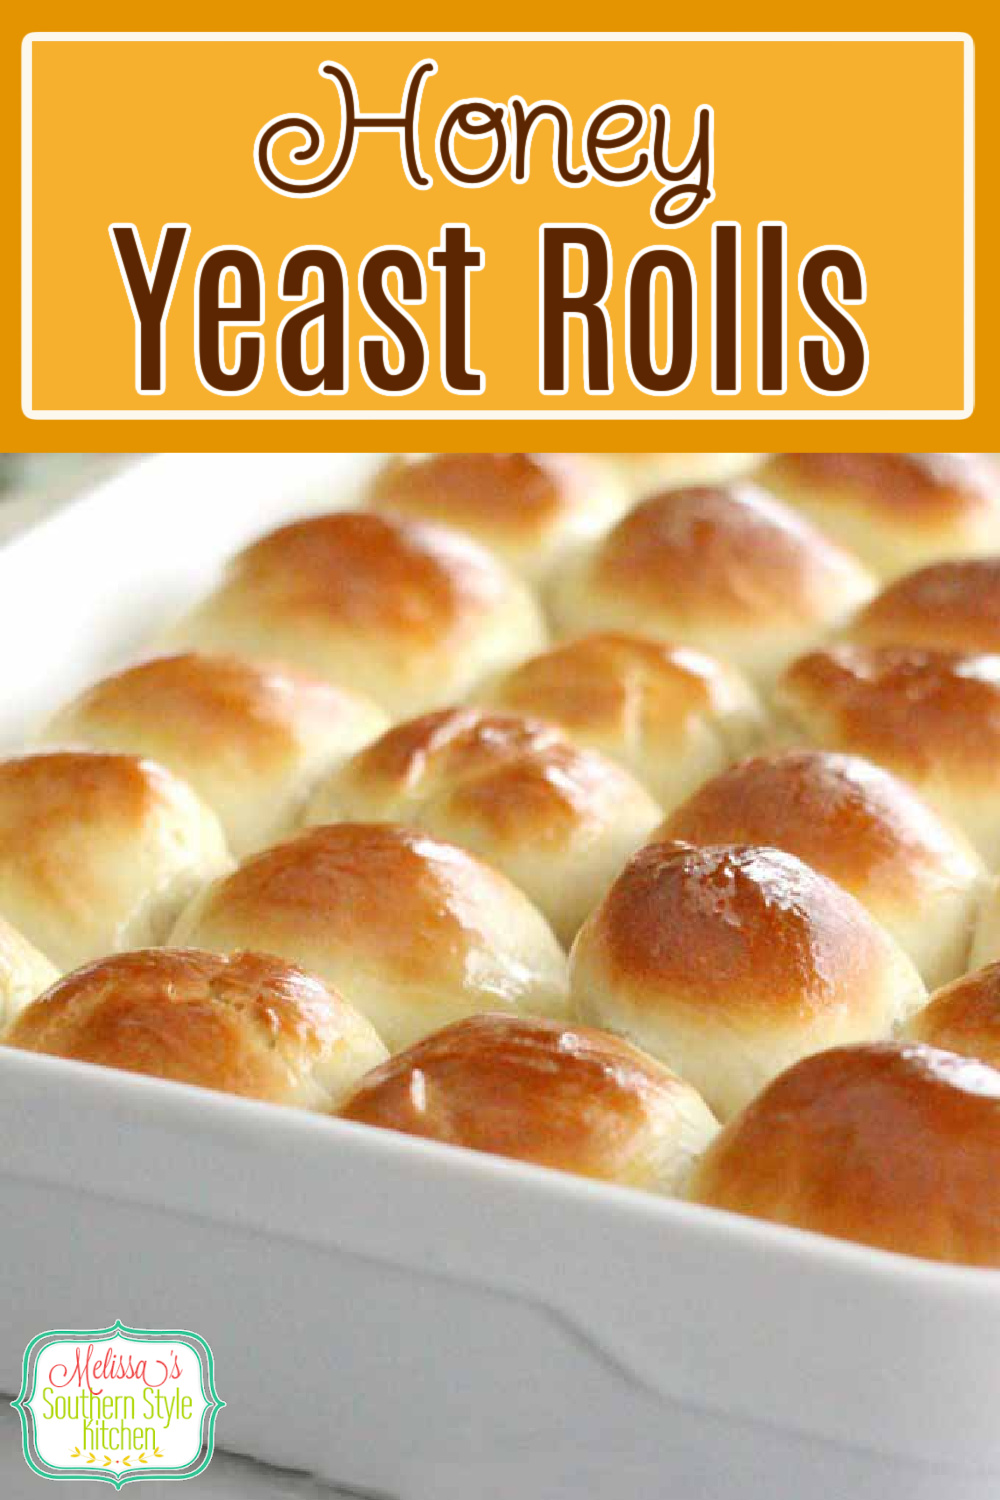 Fluffy with just a hint of honey, these yeast rolls are a spectacular bread choice at any meal #honeyyeastrolls #dinnerrolls #honeyrolls #rolls #breadrecipes #southernfood #homemadebread #dinnerideas #southernrecipes via @melissasssk